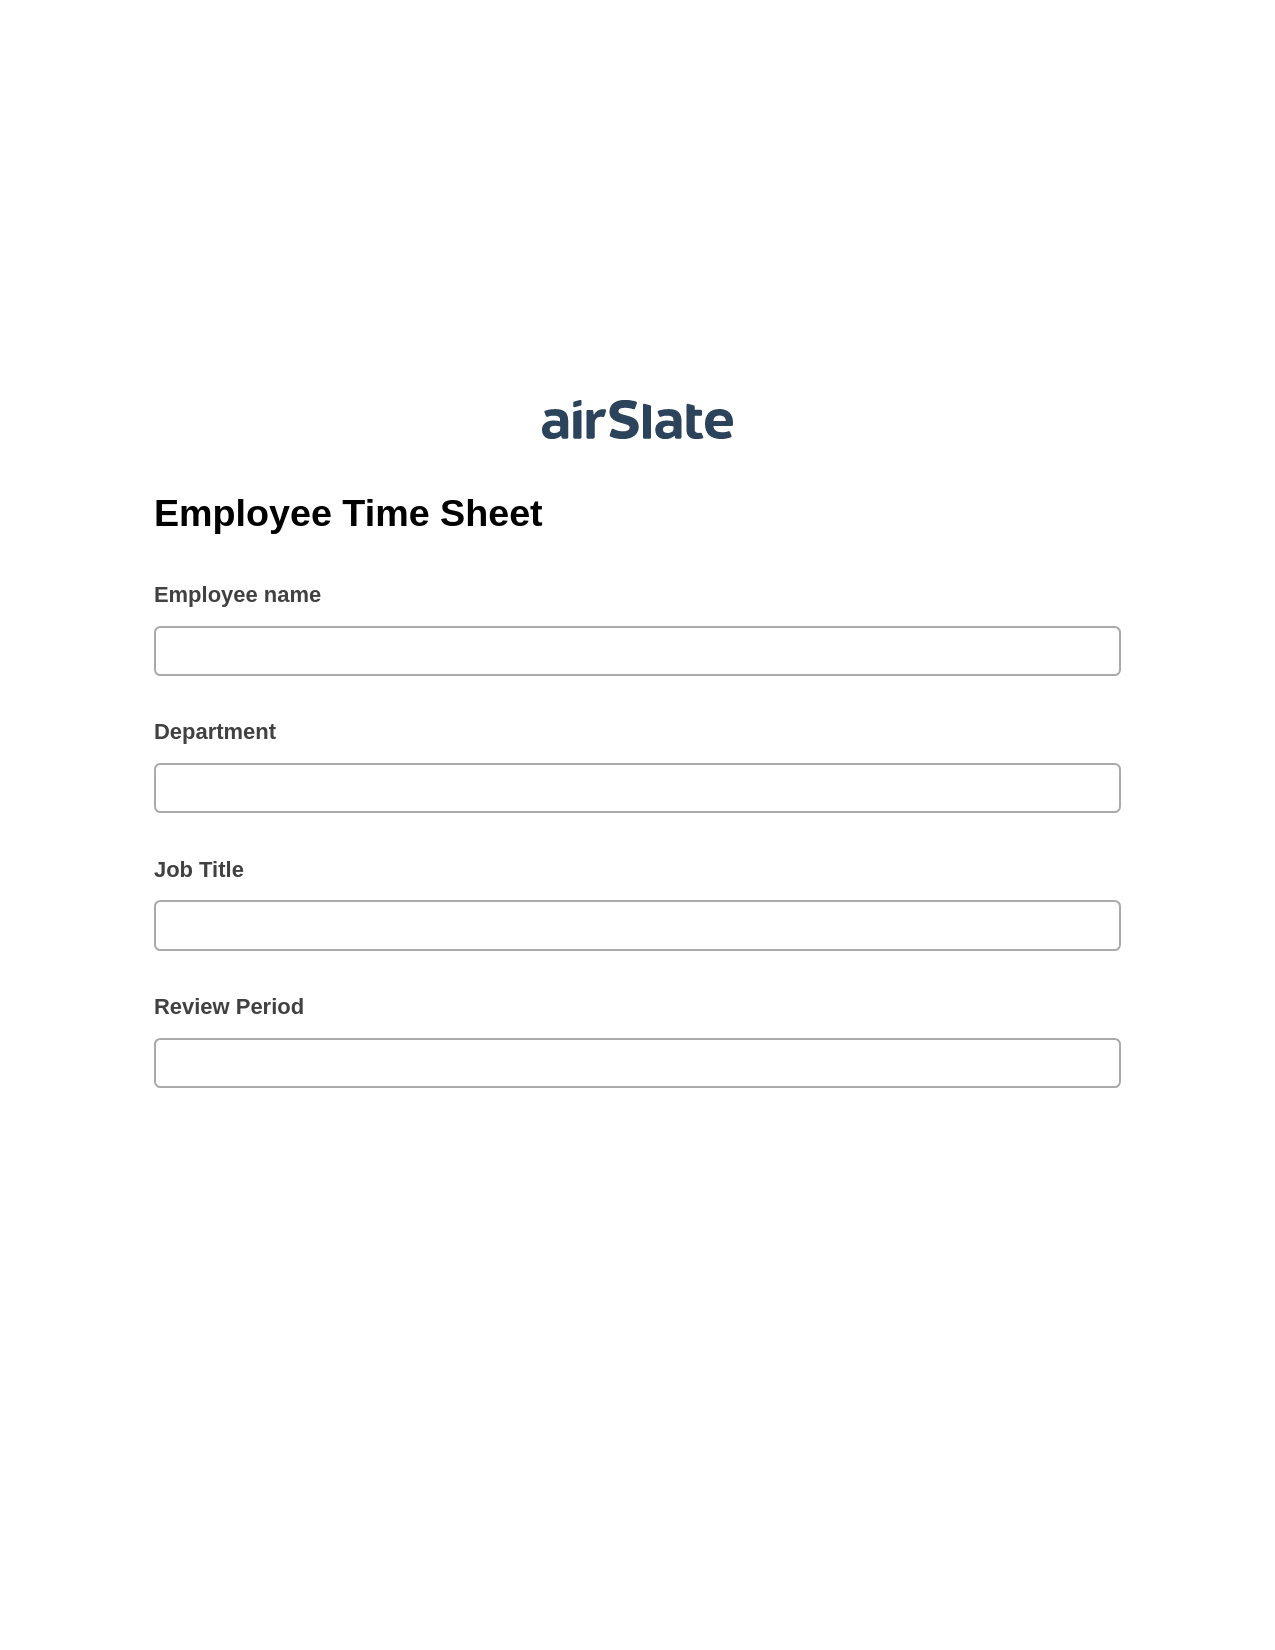 Multirole Employee Time Sheet Pre-fill from Litmos bot, Send a Slate with Roles Bot, Export to NetSuite Bot